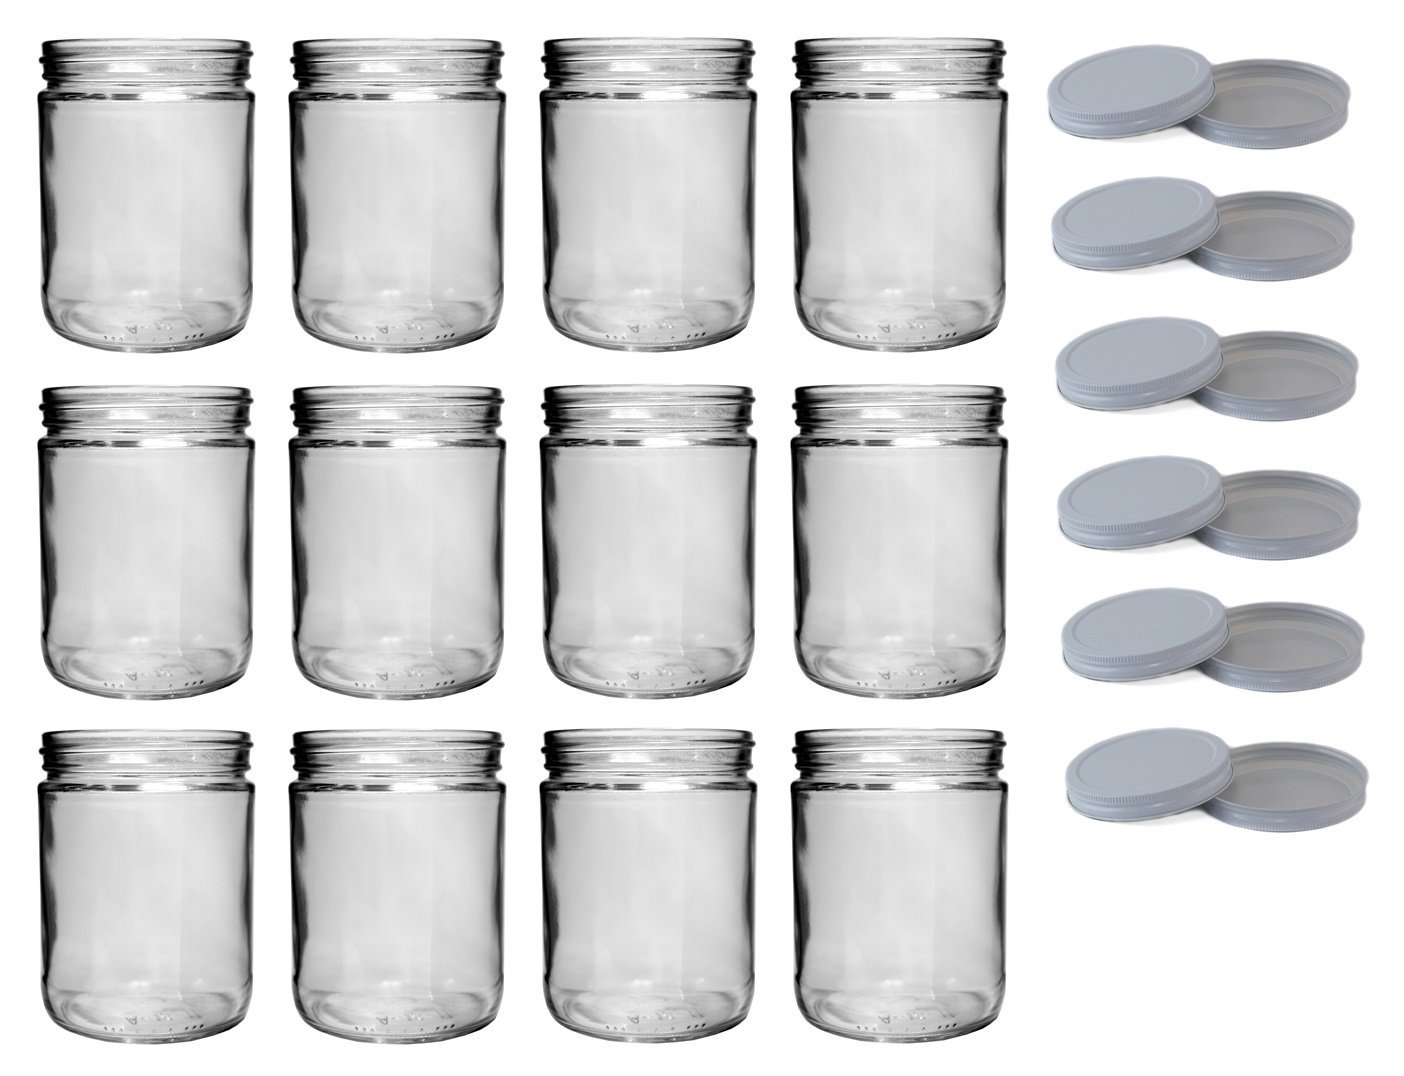 NMS 16 Ounce Glass Wide Mouth Straight-Sided Canning Jars - Case